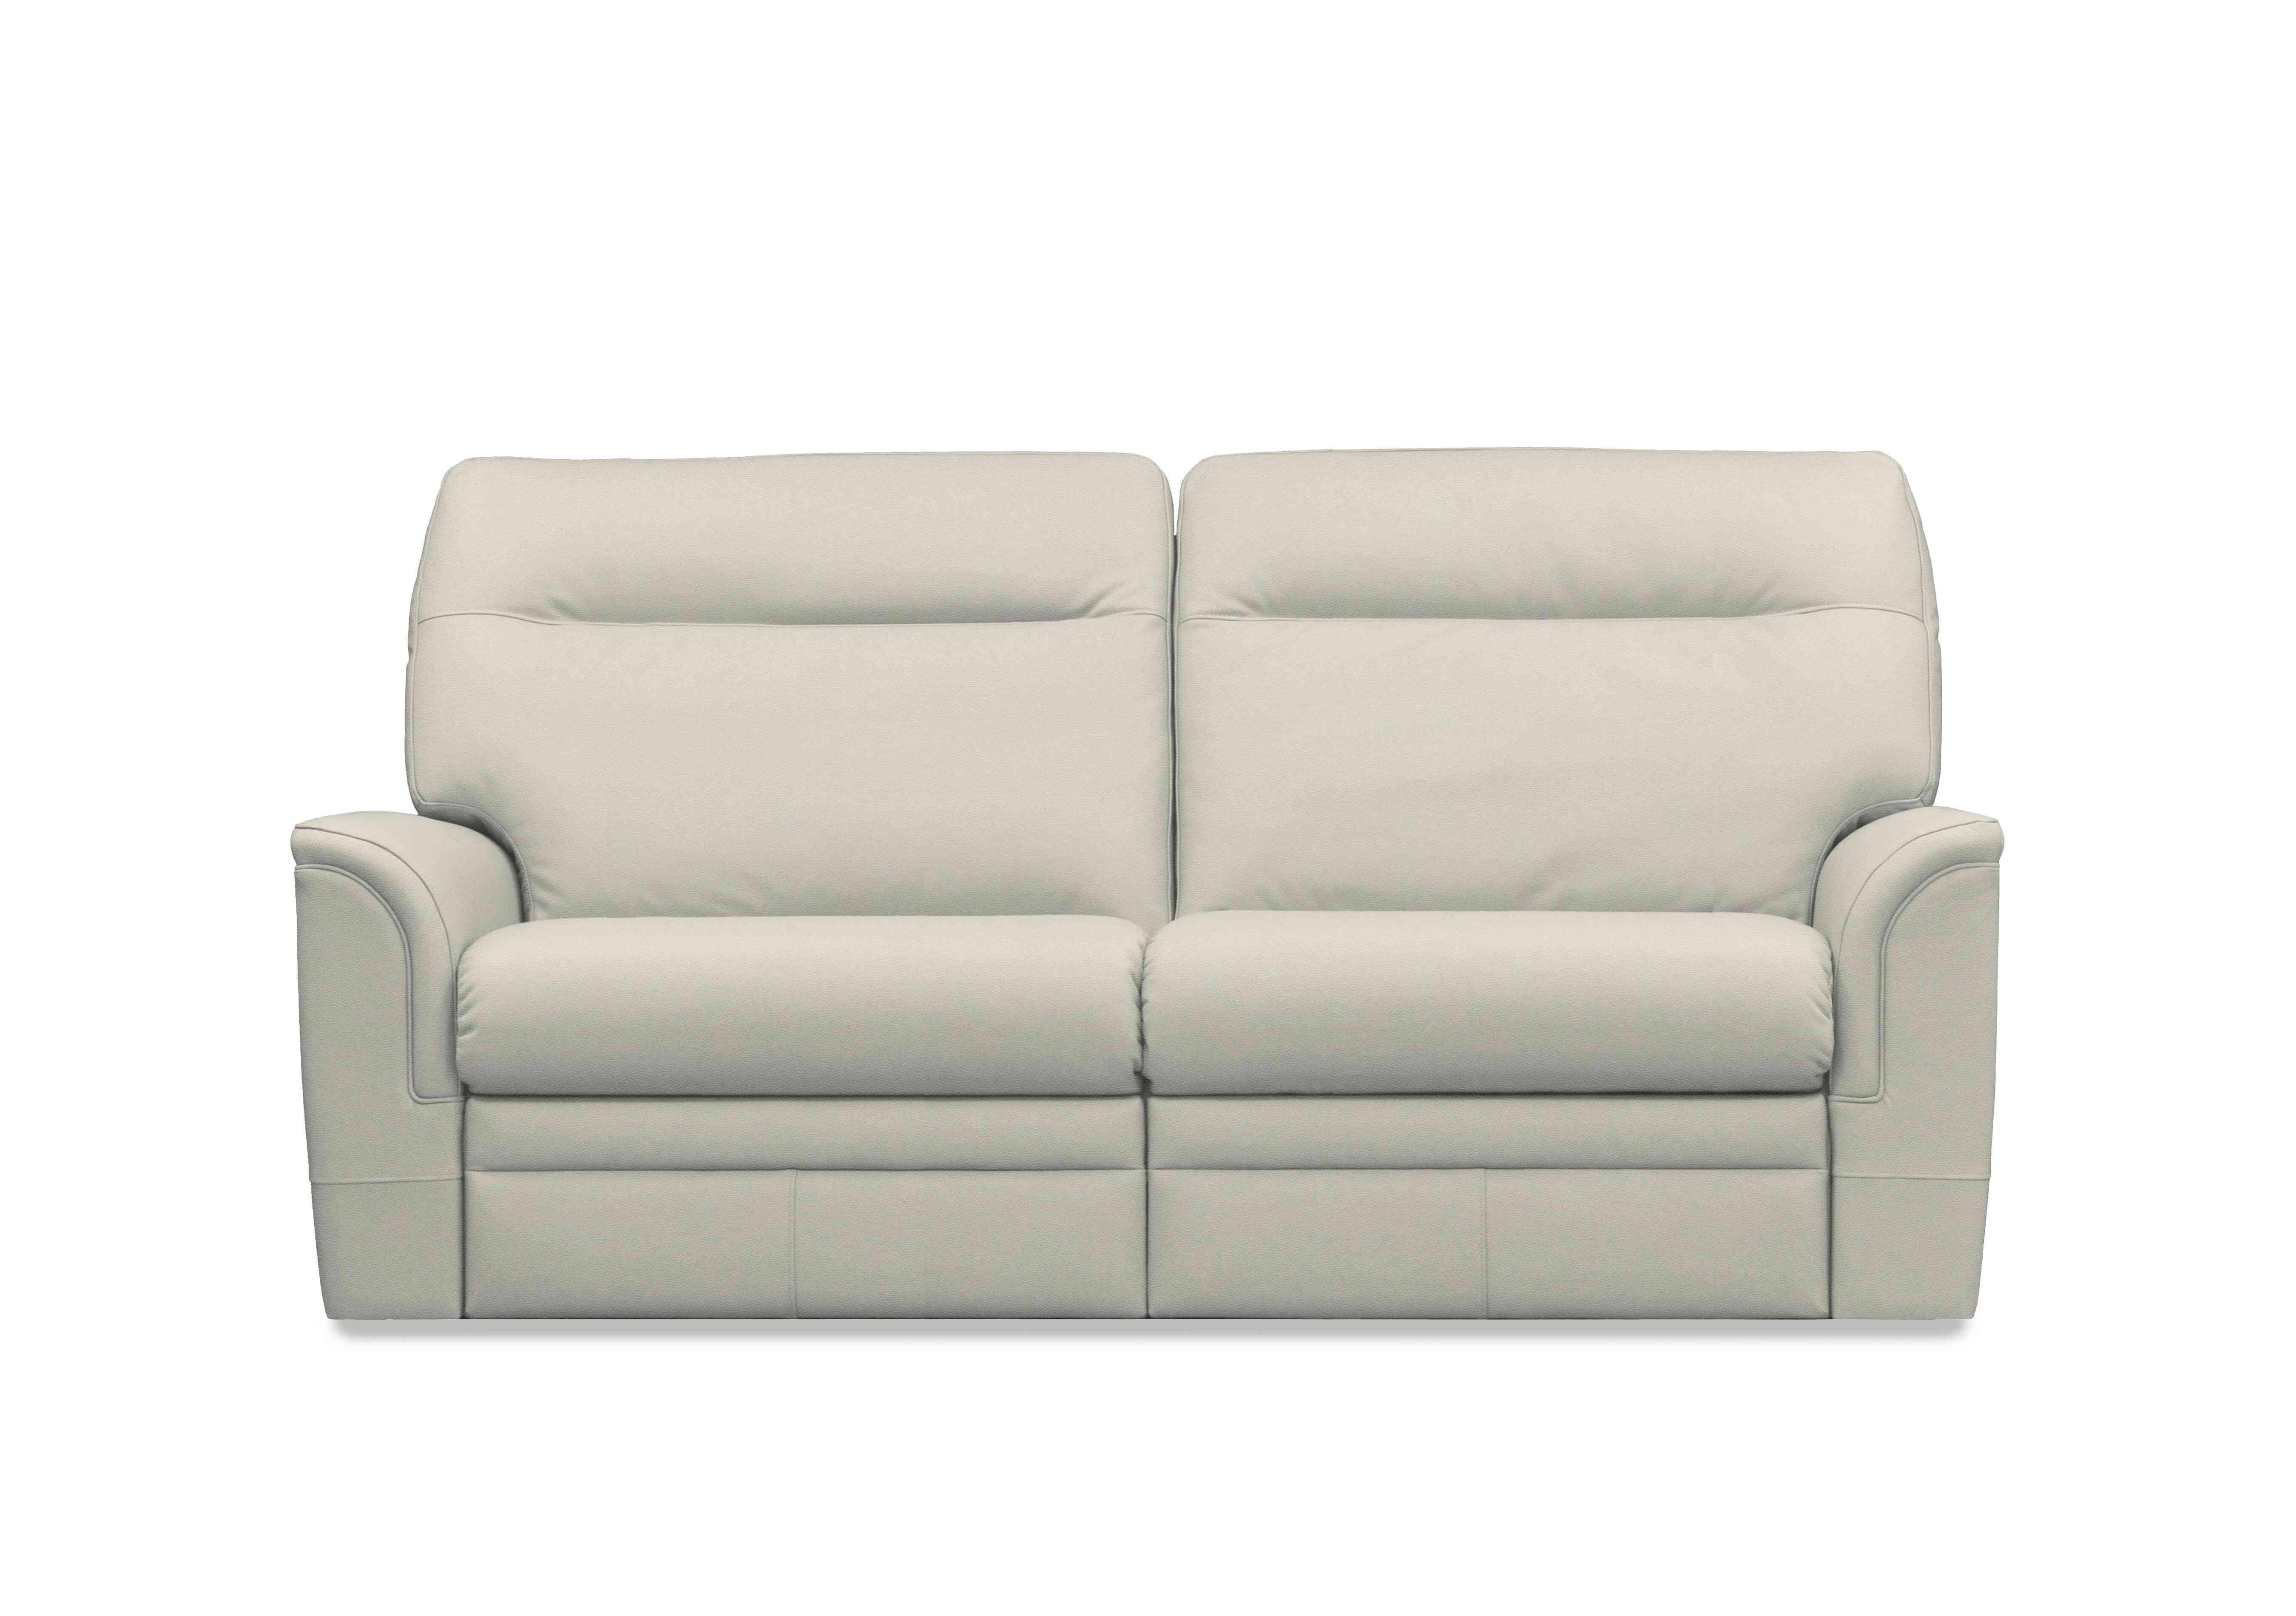 Hudson 23 Large 2 Seater Leather Sofa in Como Dove 0053051-0092 on Furniture Village